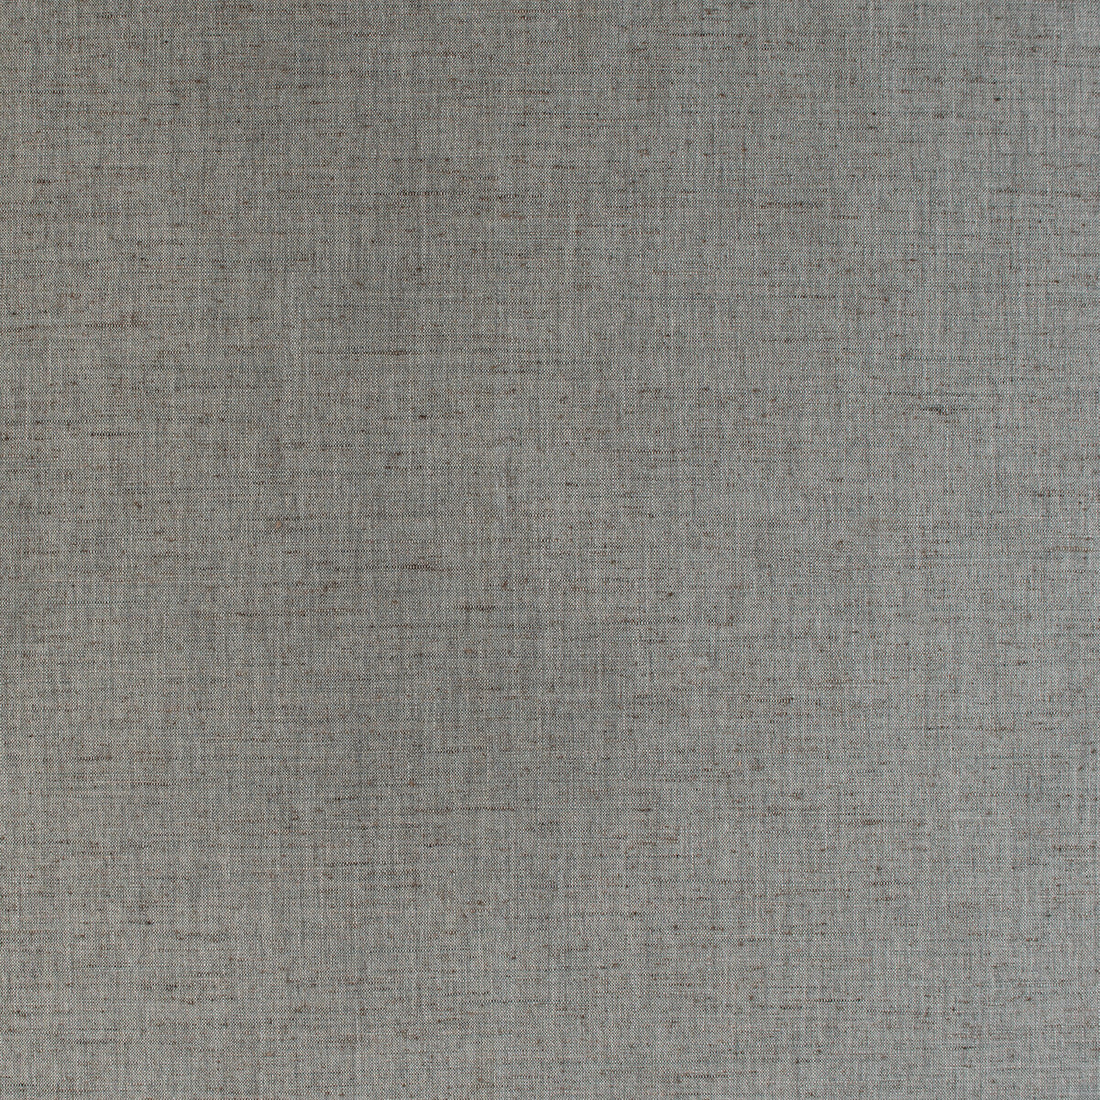 Groundcover fabric in grey color - pattern 35911.11.0 - by Kravet Design in the Barbara Barry Home Midsummer collection